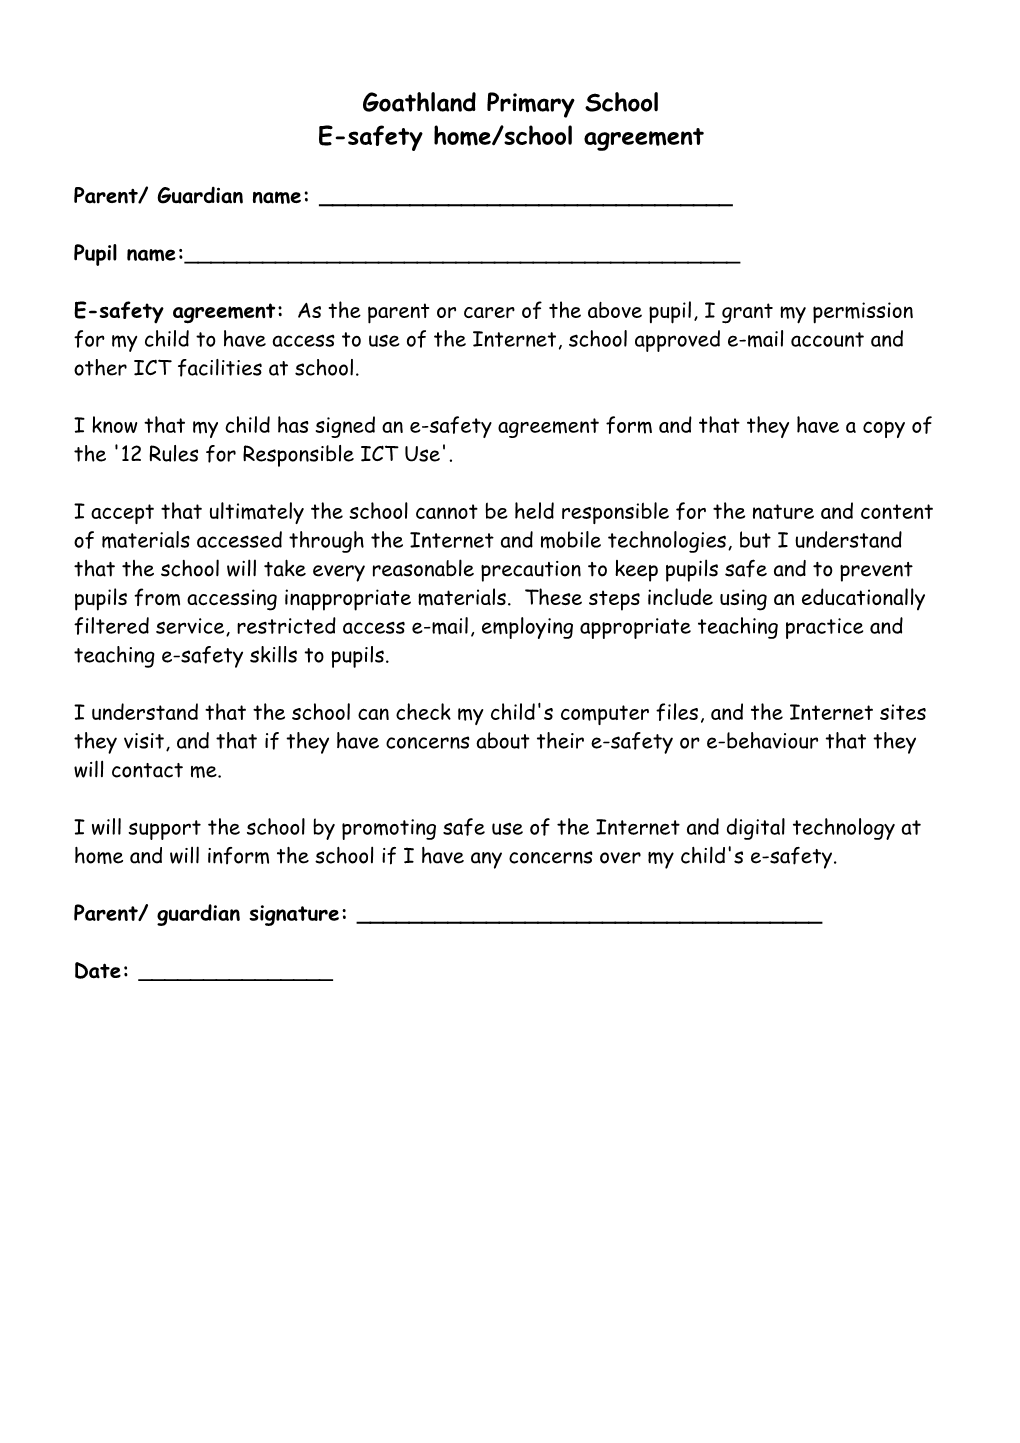 E-Safety Home/School Agreement